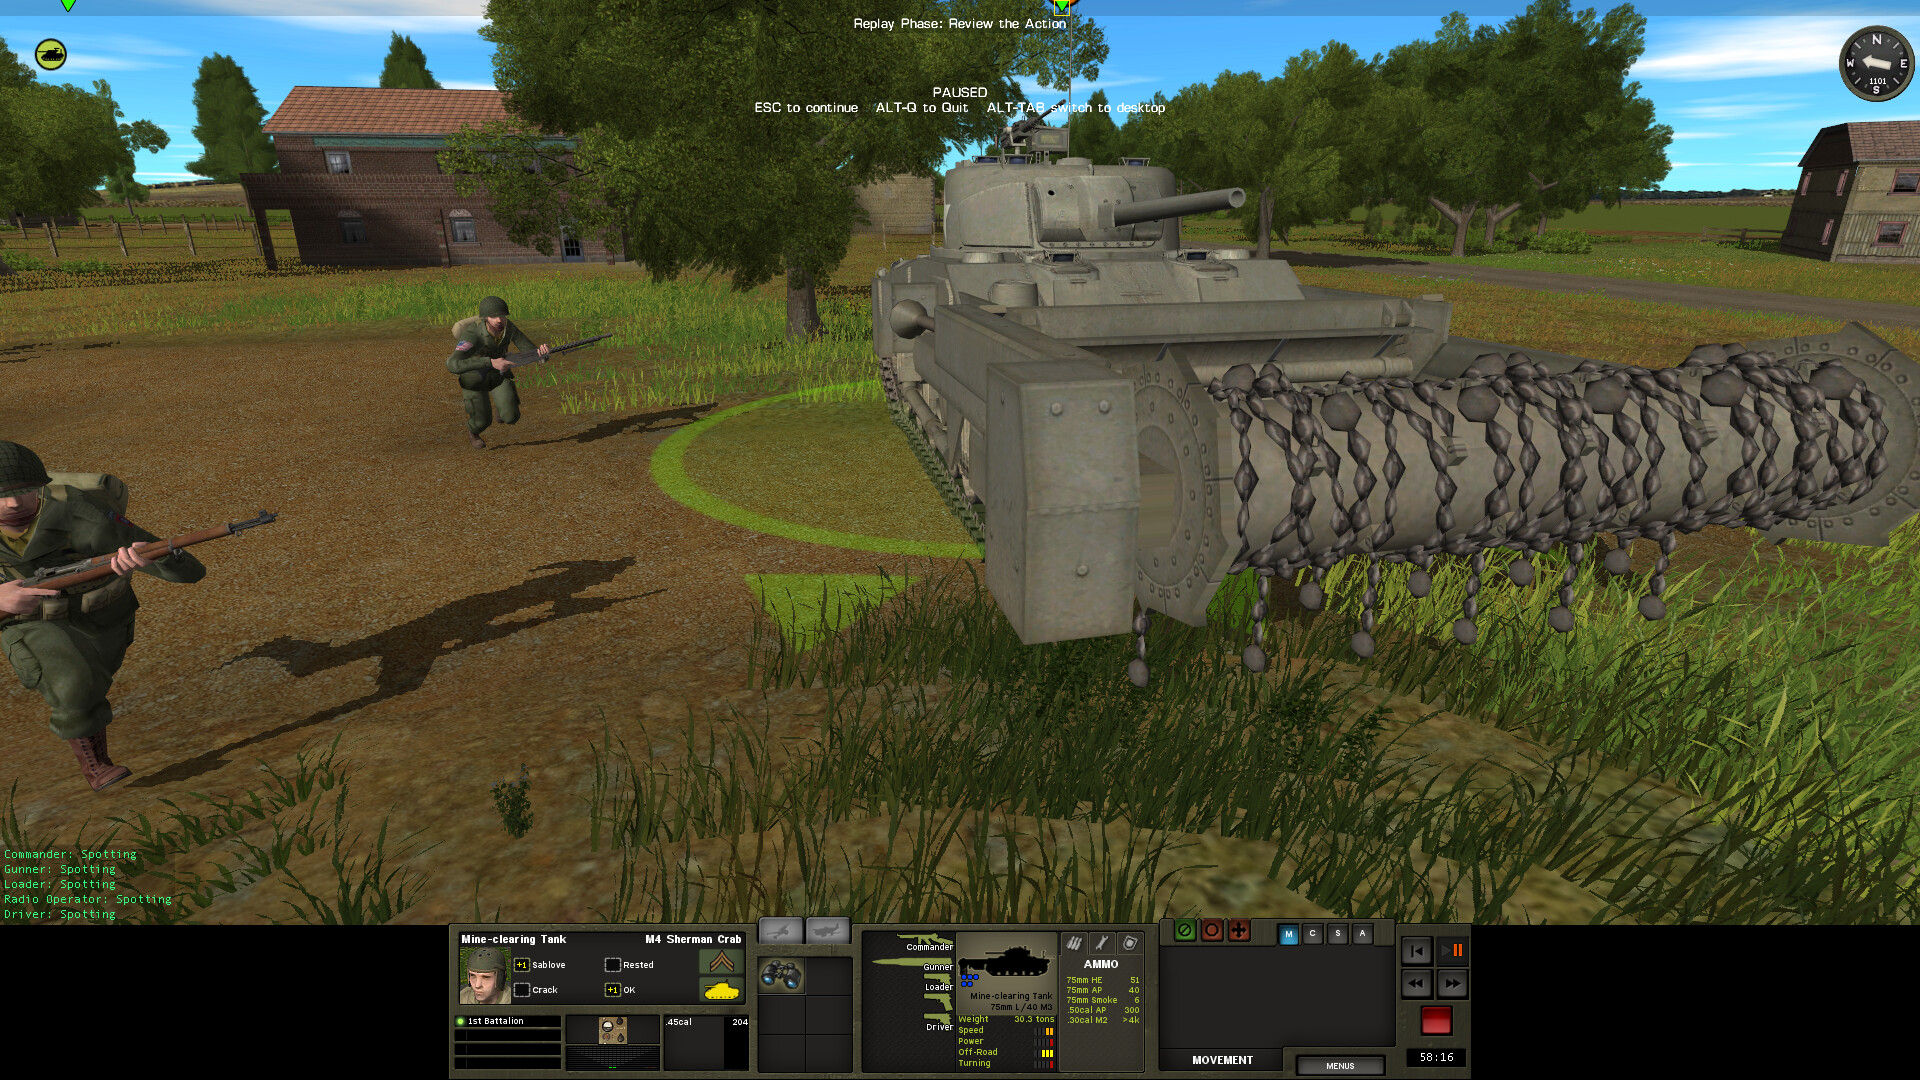 Combat Mission: Battle for Normandy - Vehicle Pack DLC Steam CD Key 8.95 usd